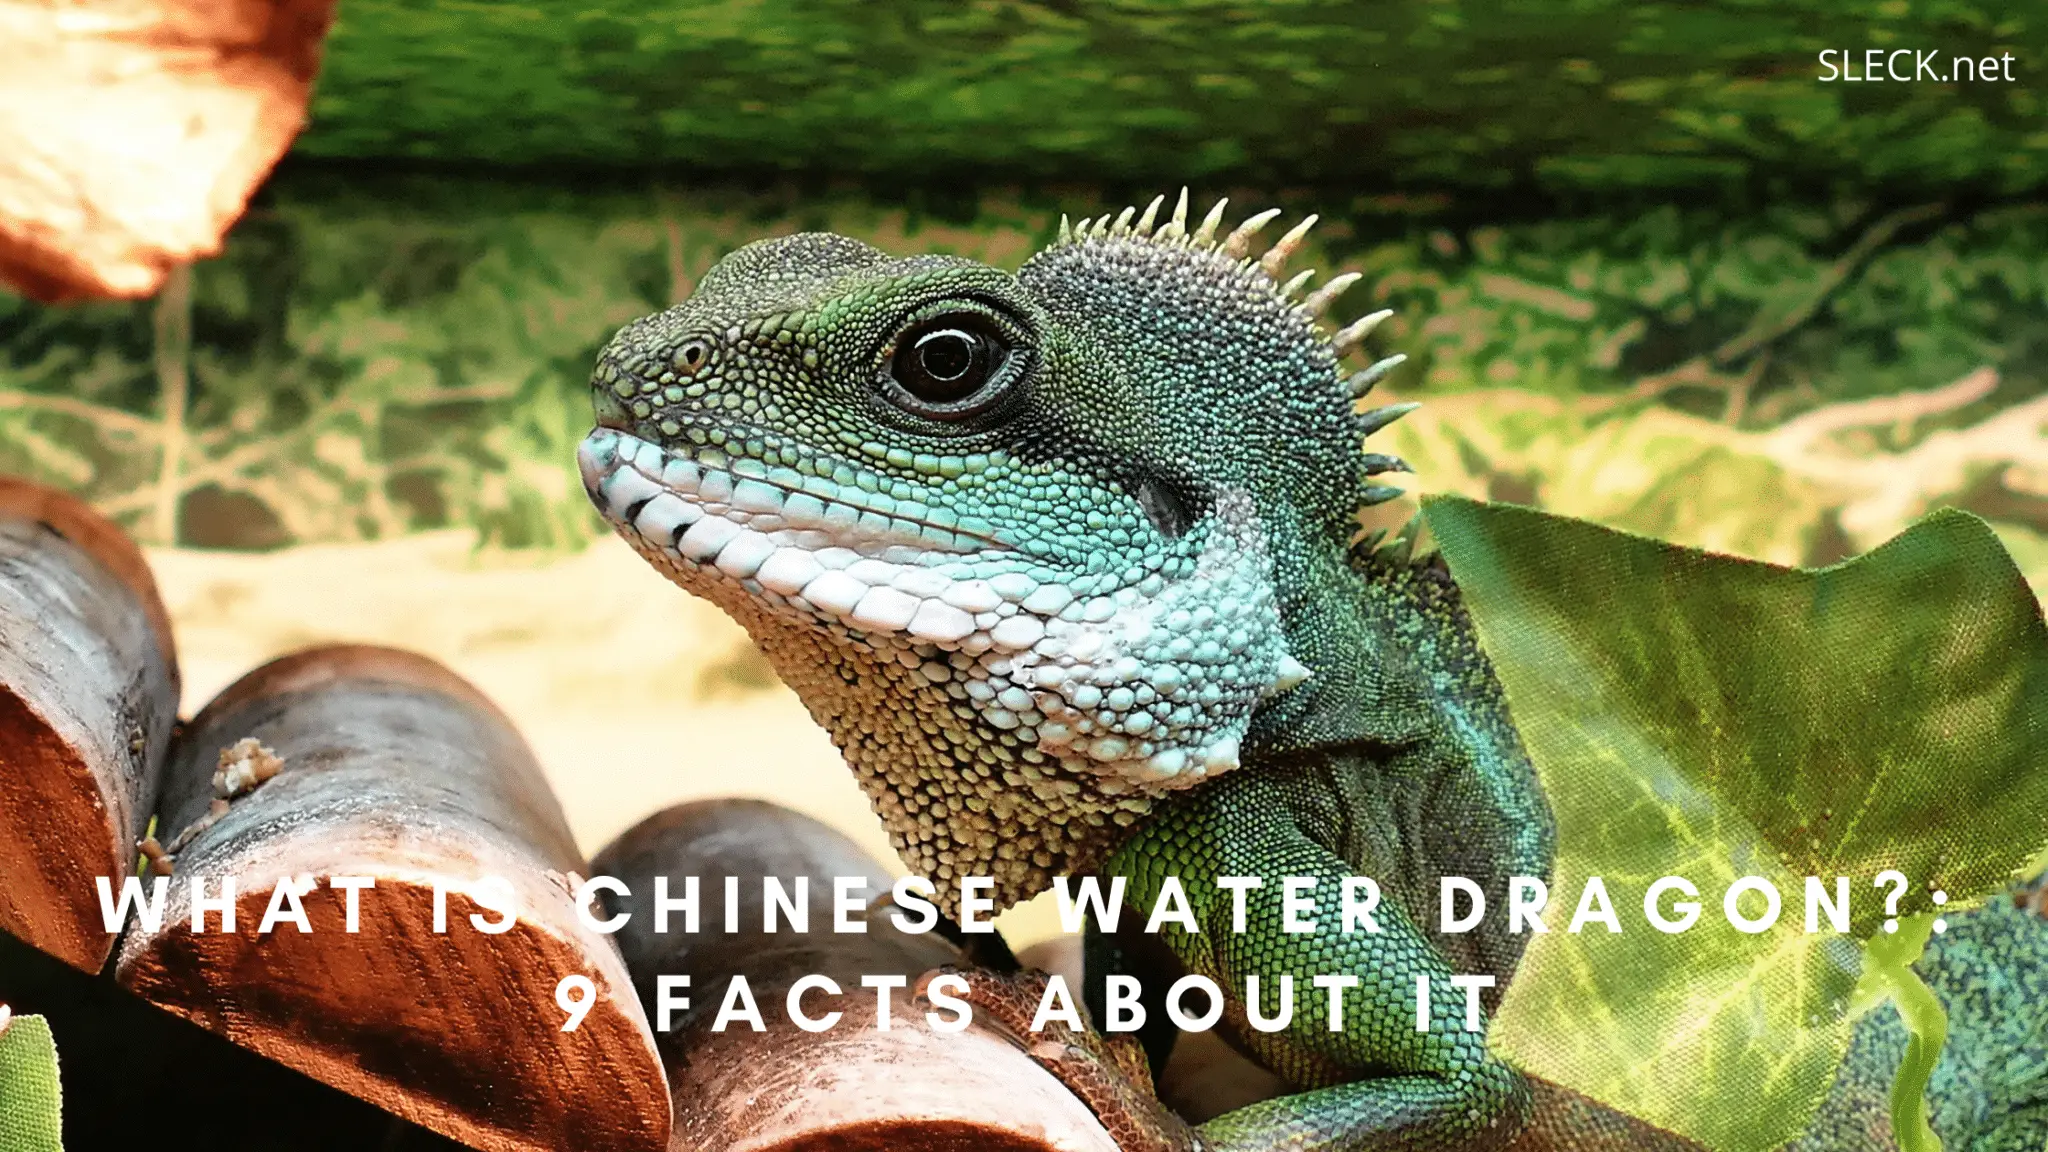 What is a Chinese Water Dragon? 9 Facts About it